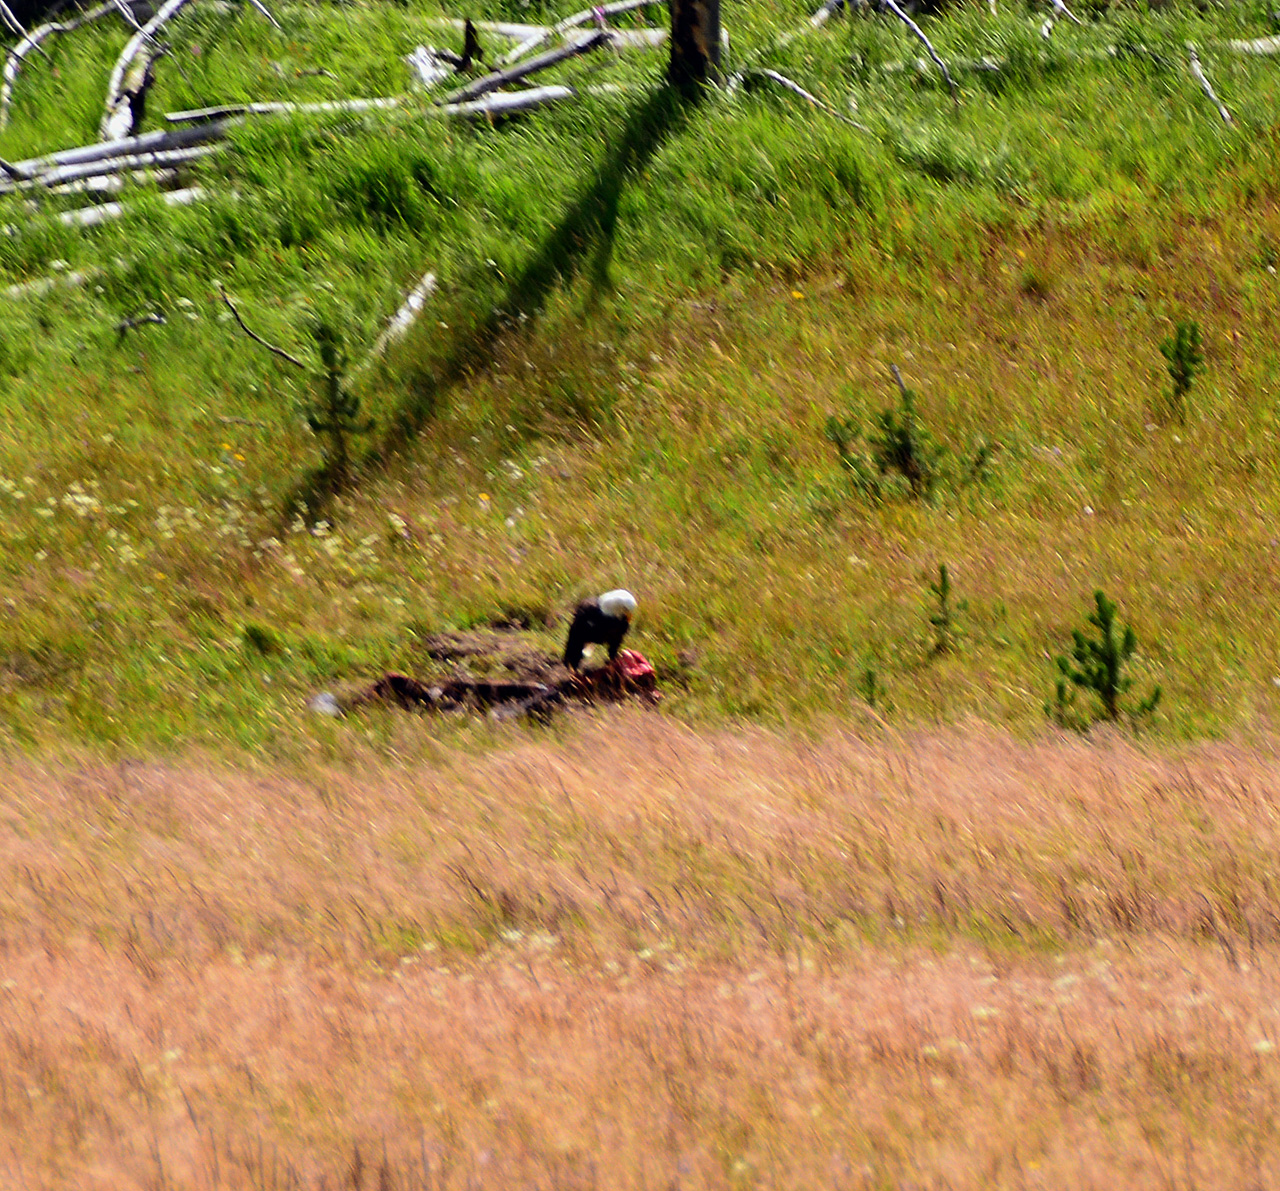 2015-07-26, 083, Yellowstone NP, WY, Eagle with Kill